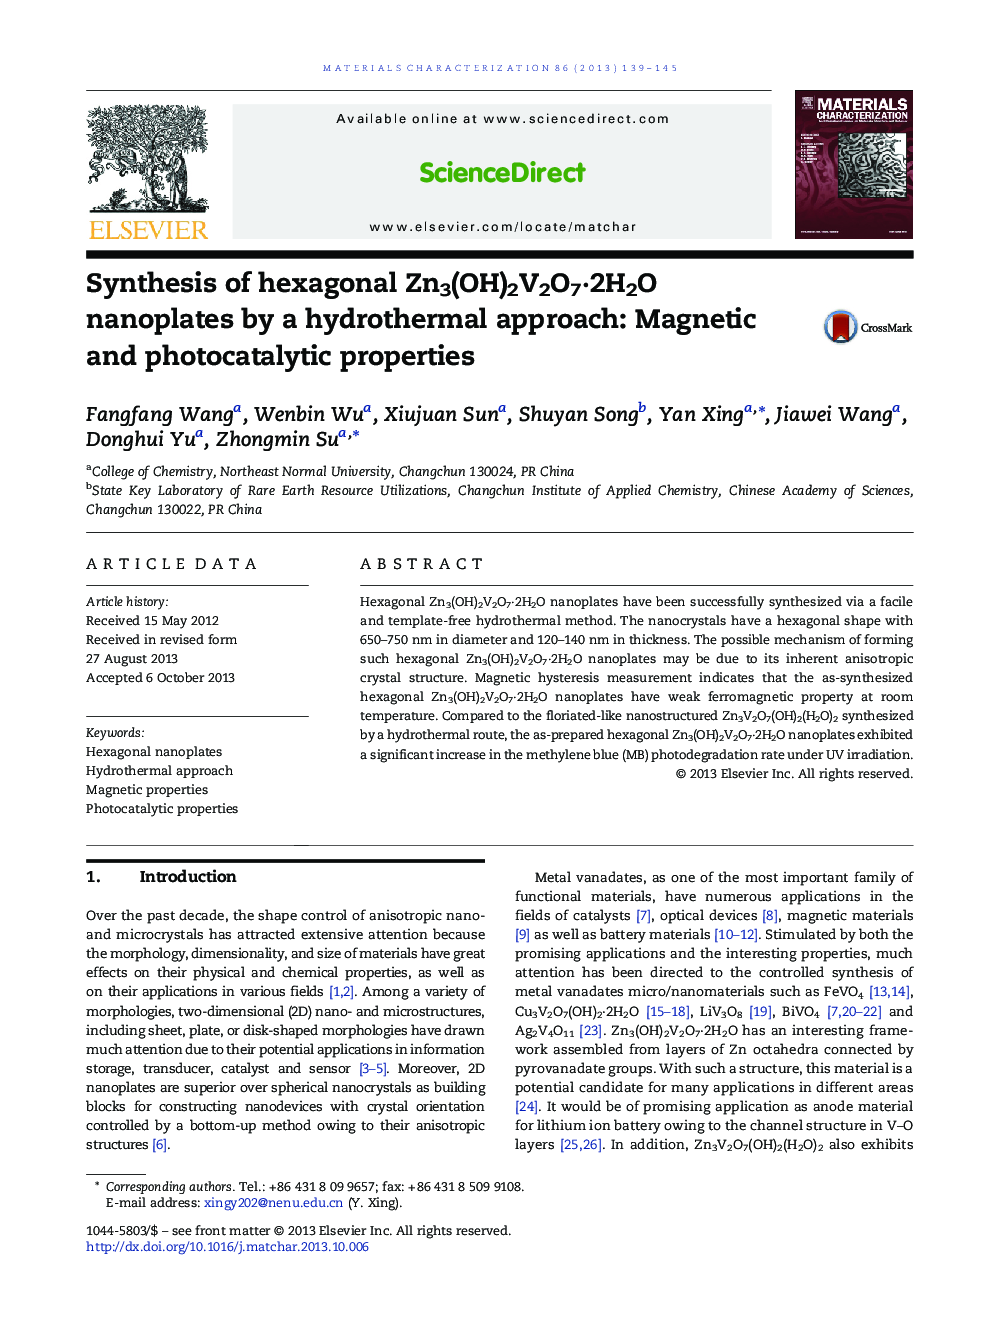 Synthesis of hexagonal Zn3(OH)2V2O7·2H2O nanoplates by a hydrothermal approach: Magnetic and photocatalytic properties